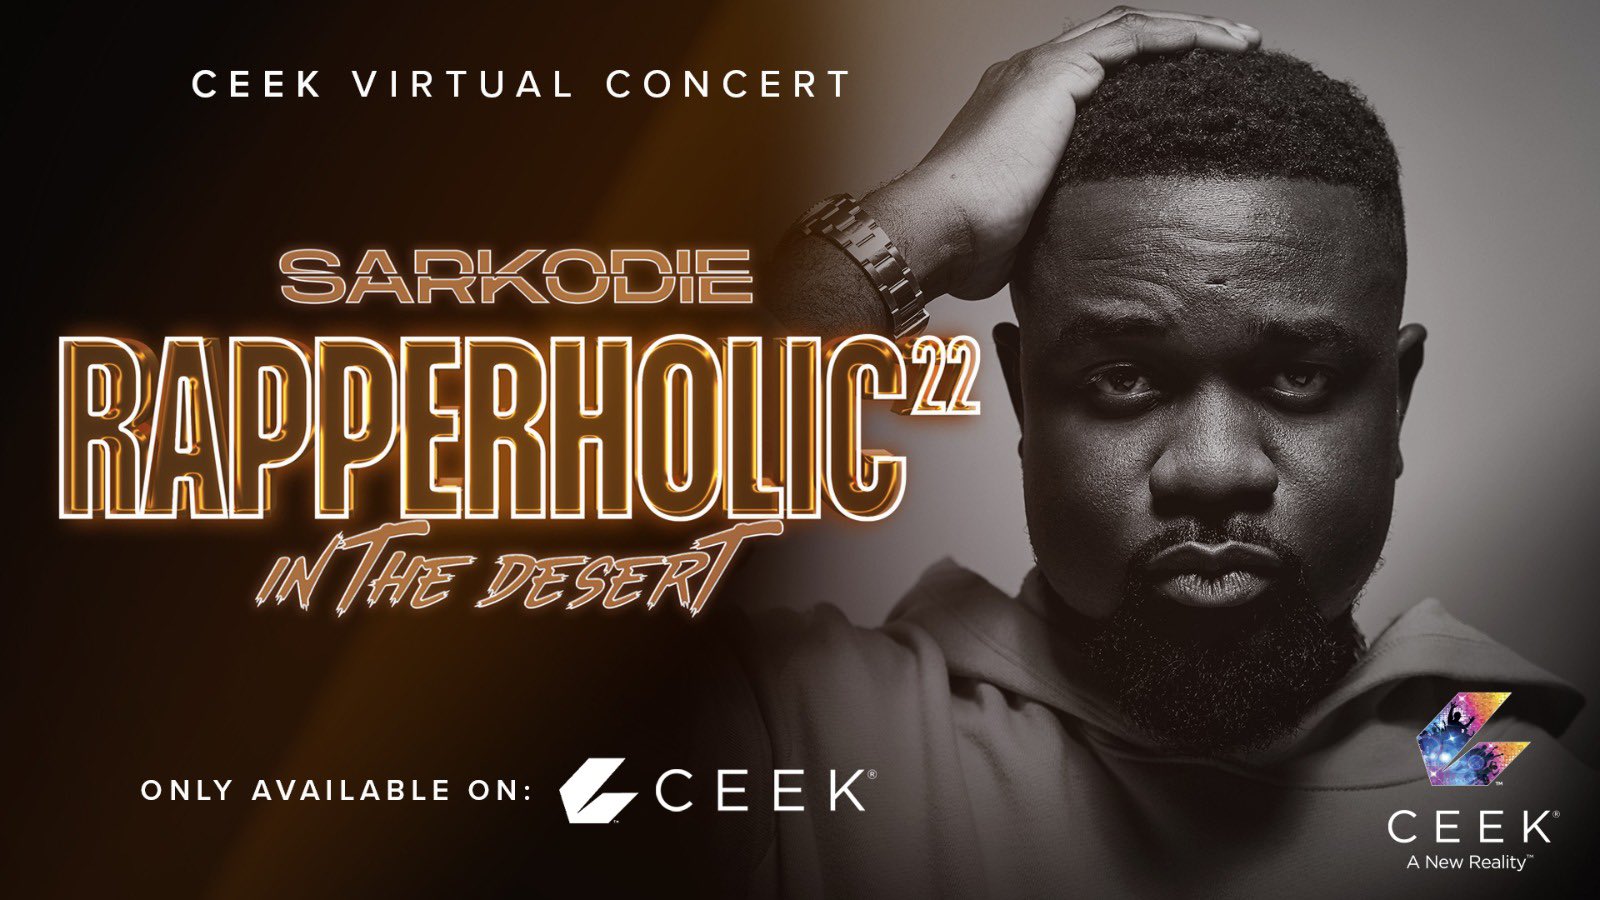 Sarkodie to host Rapperholic 2022 In The Desert